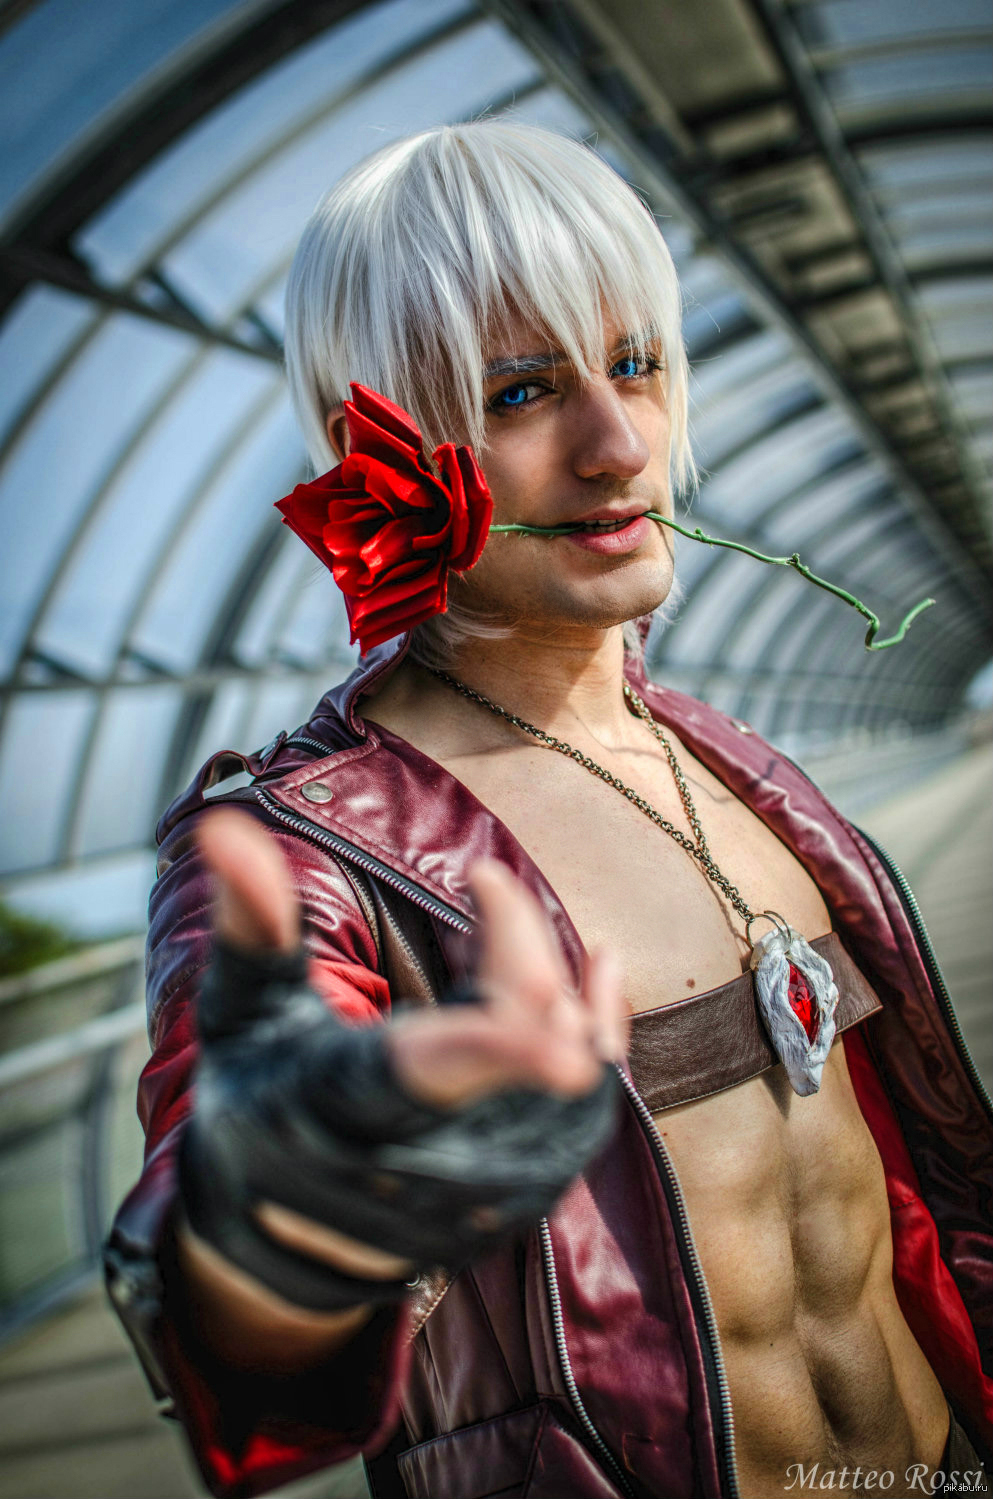 Top cosplay. Данте Devil May Cry Cosplay. Данте DMC косплей. Данте ДМС косплей.